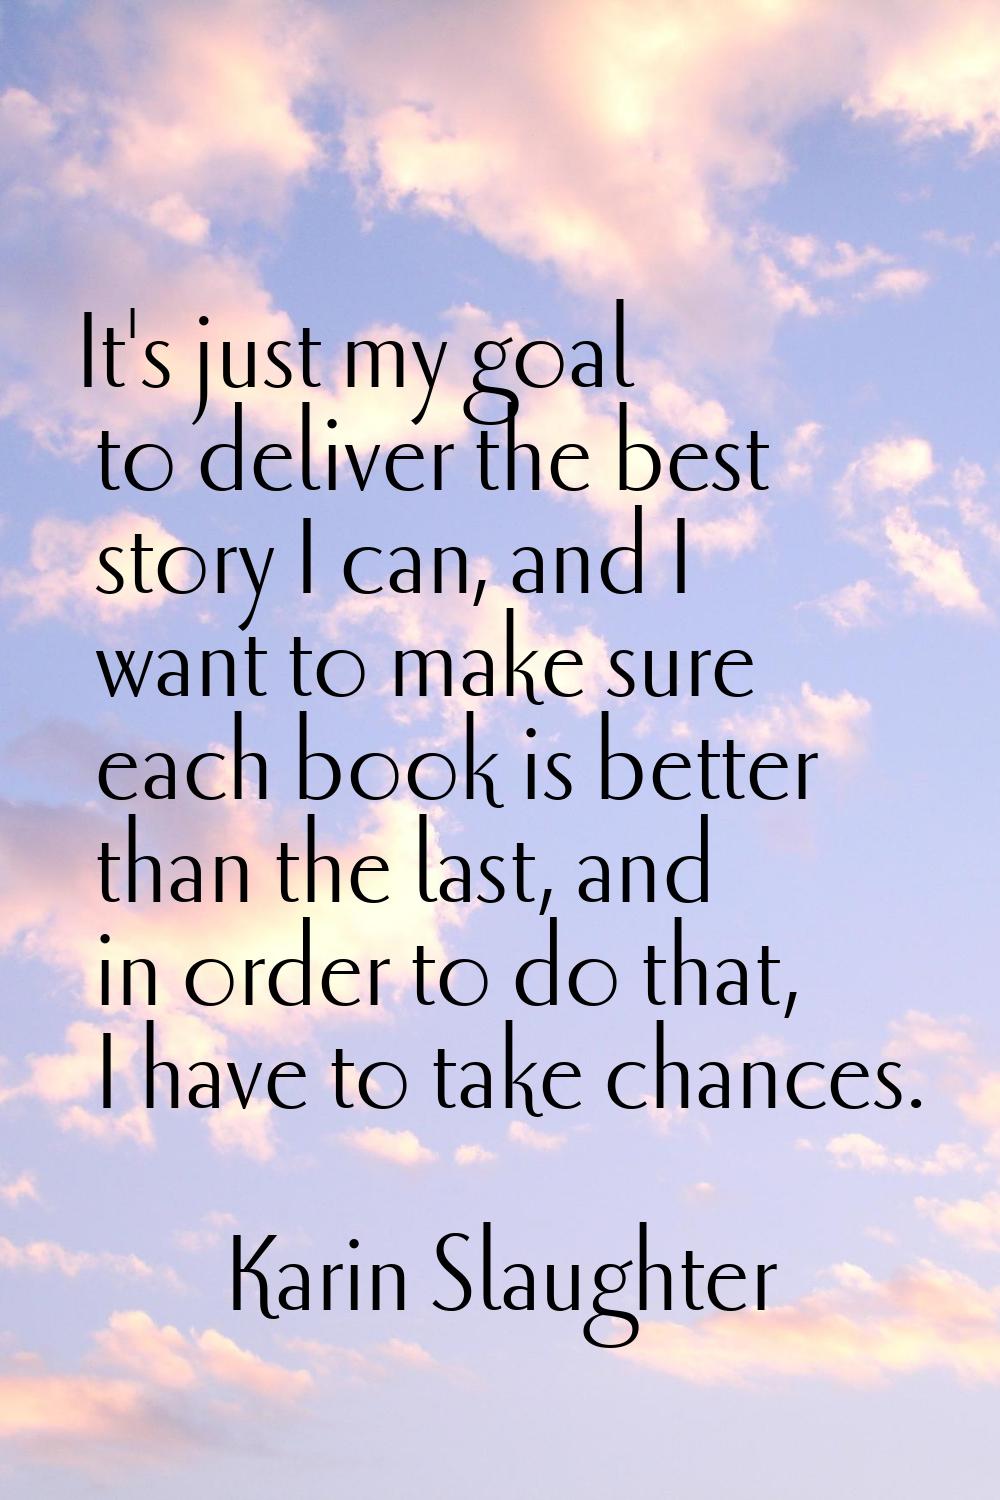 It's just my goal to deliver the best story I can, and I want to make sure each book is better than